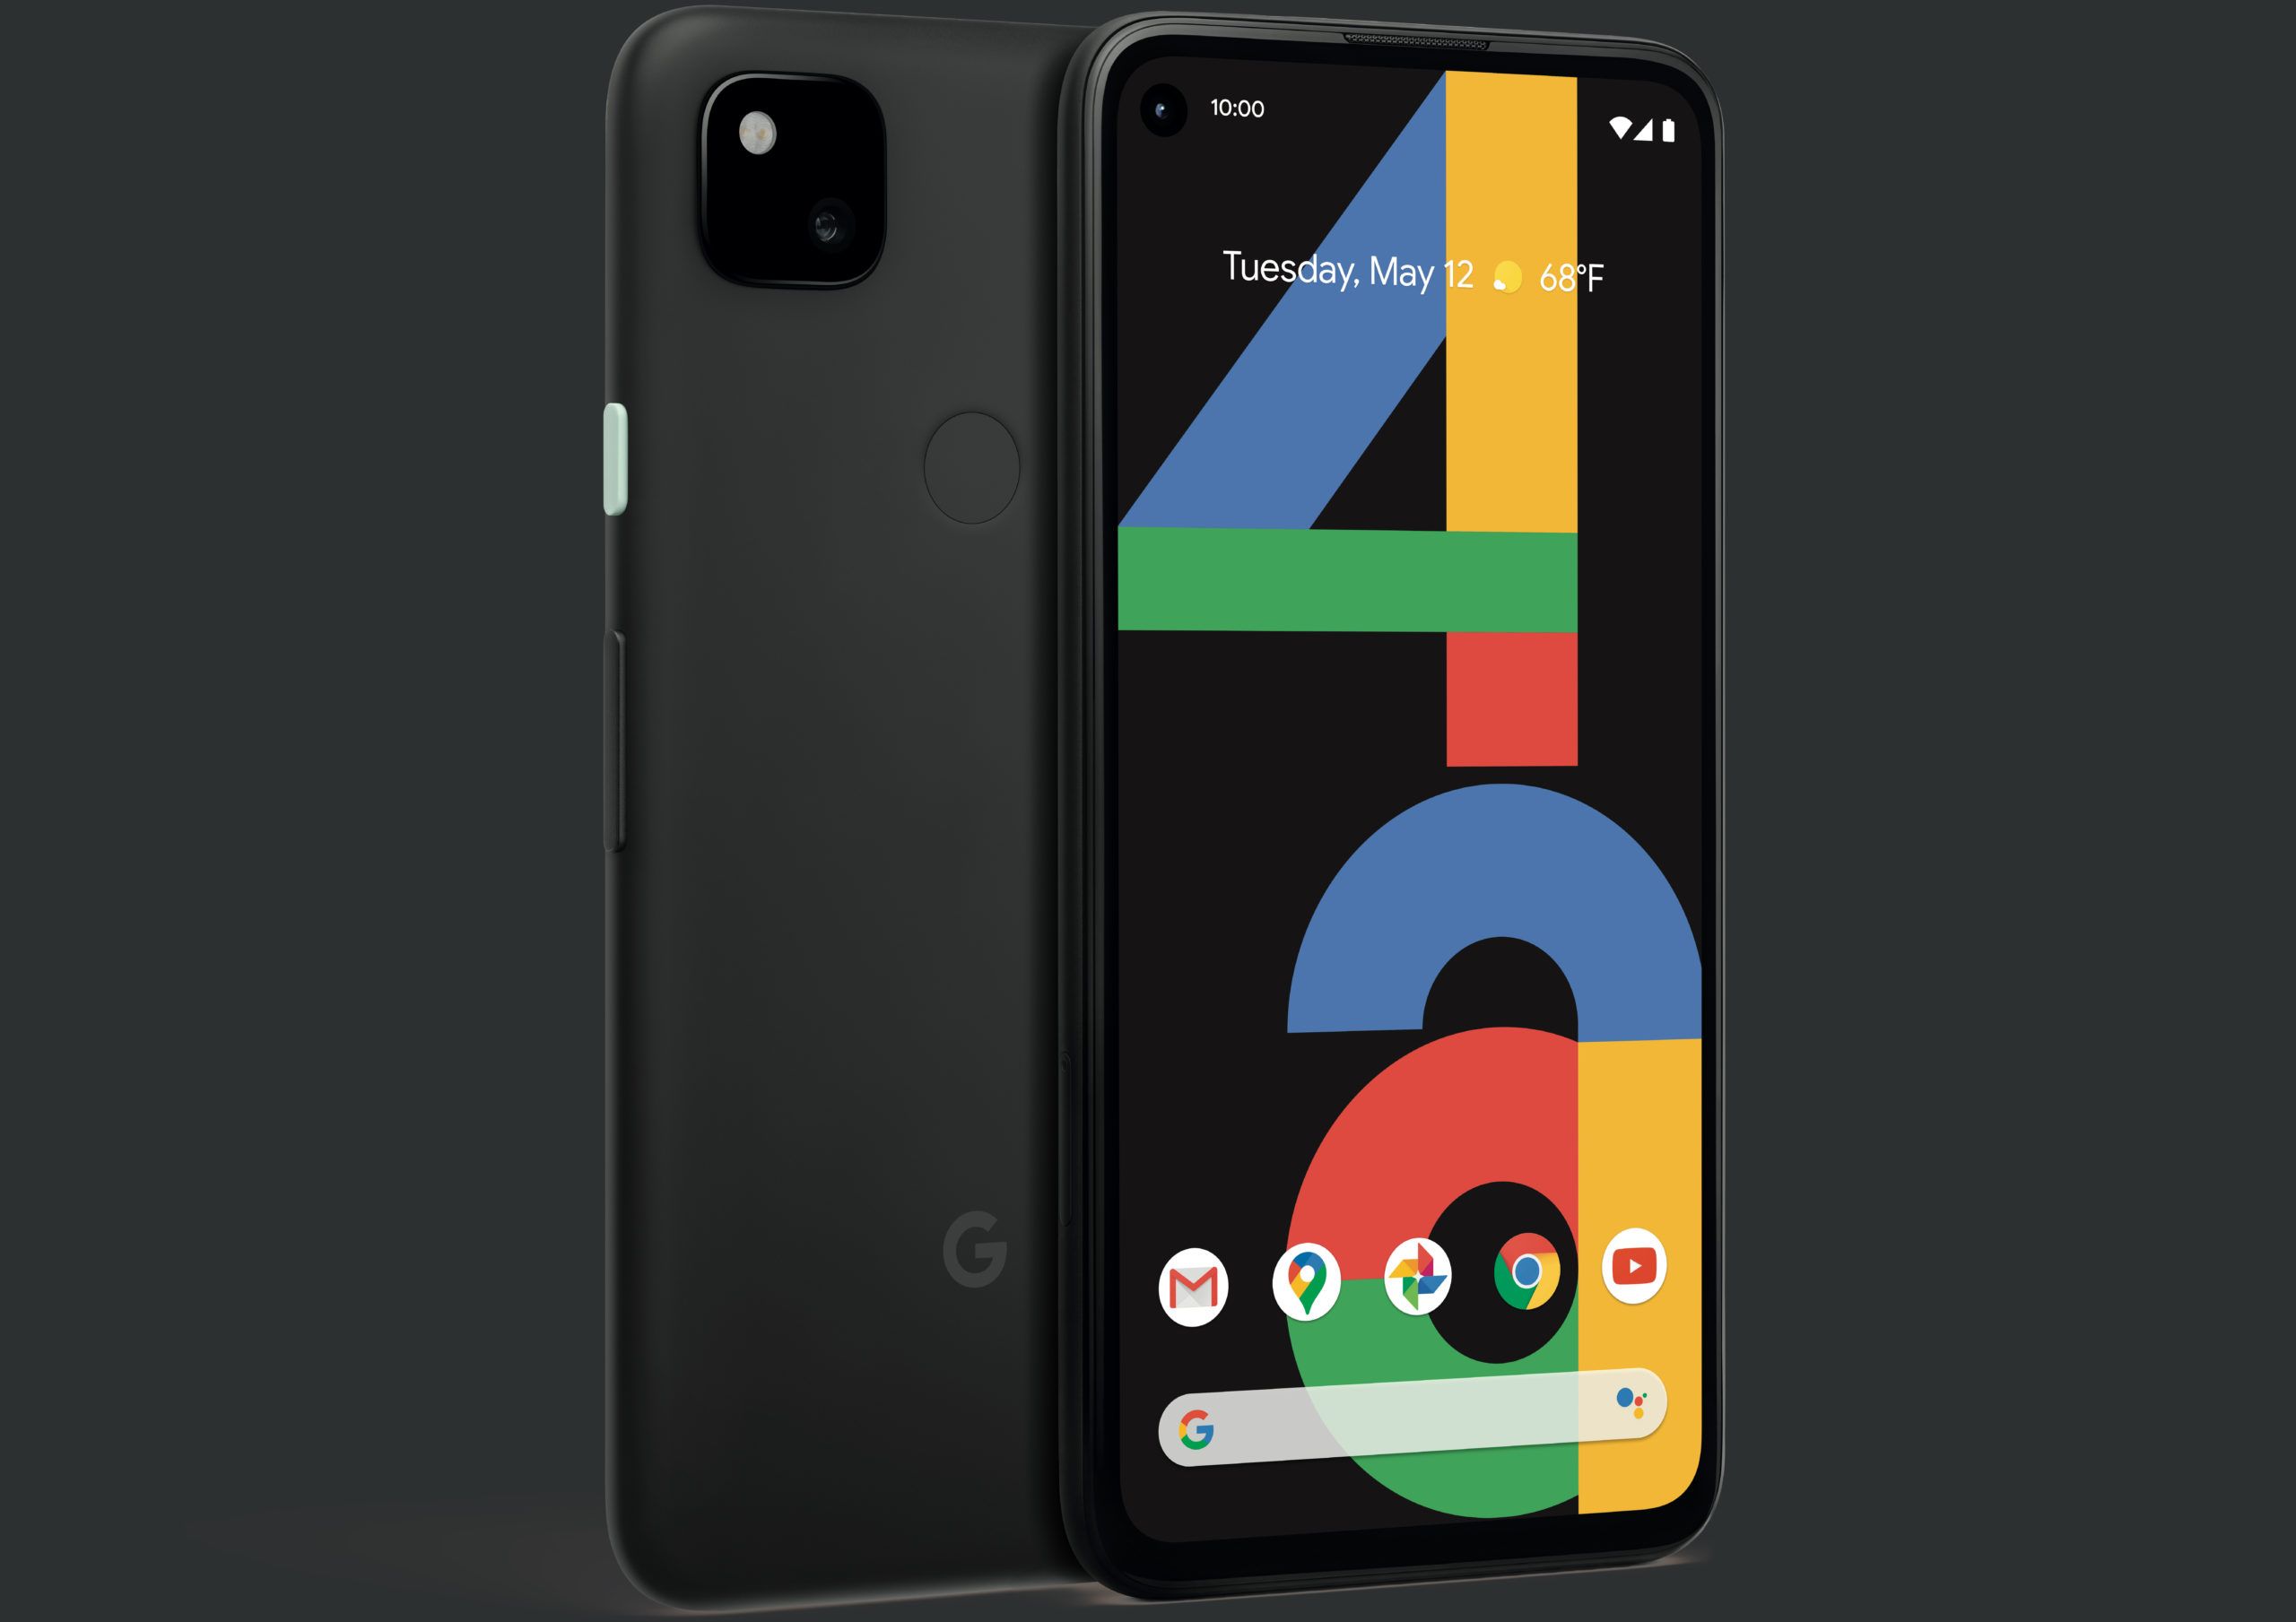 The Google Pixel 4a is official: Pricing, specs, release date, and more